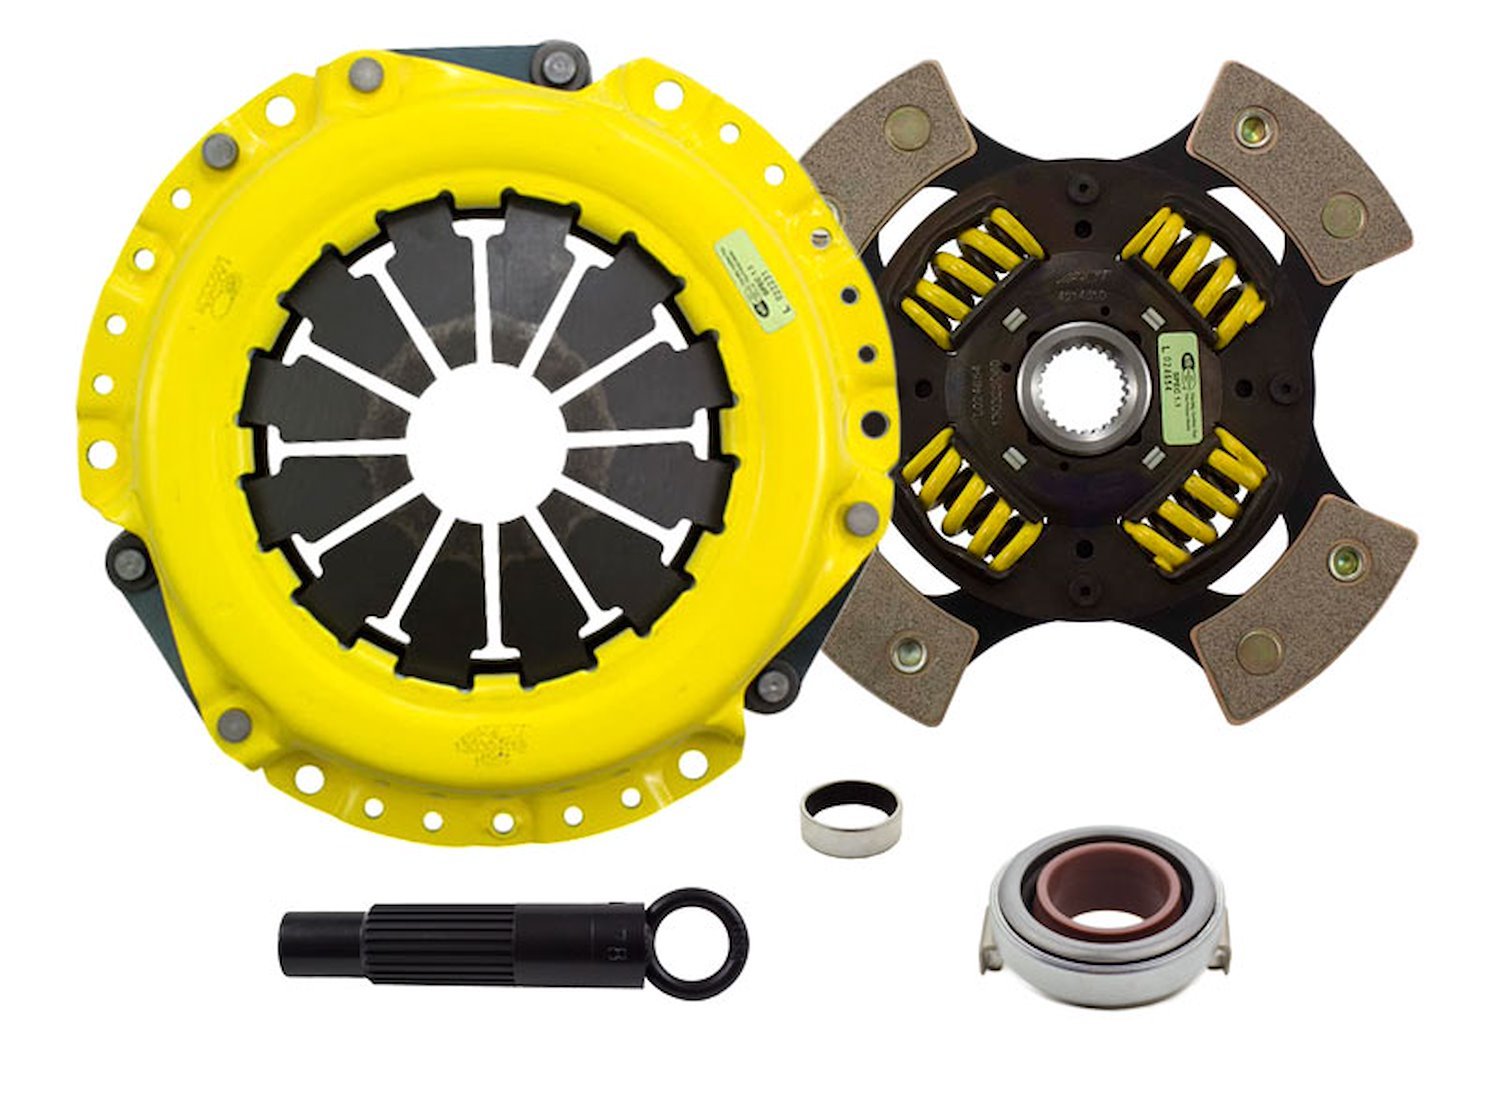 HD/Race Sprung 4-Pad Transmission Clutch Kit Fits Select Acura/Honda